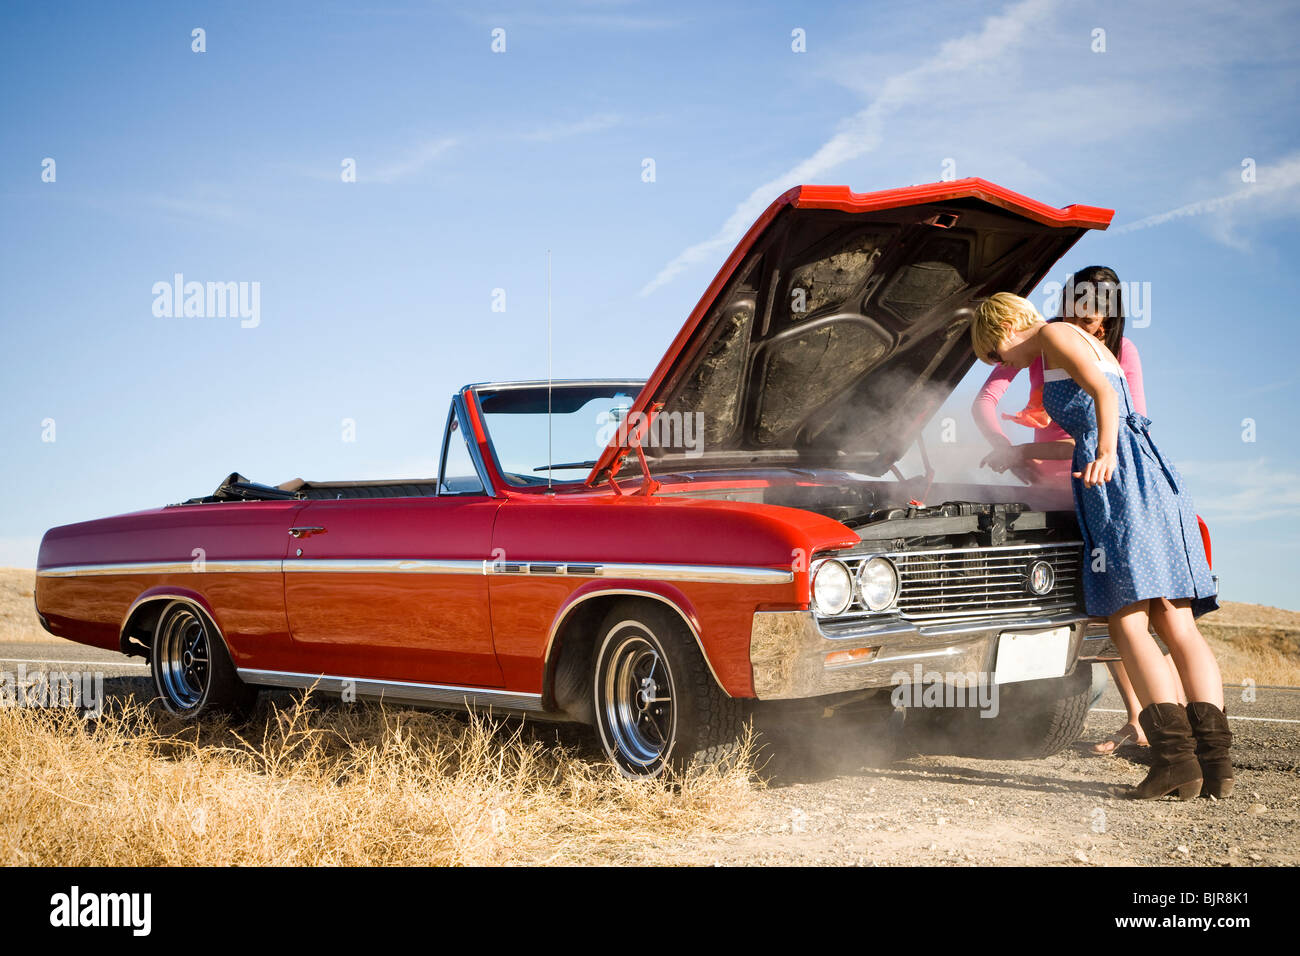 two women with a broken down car Stock Photo